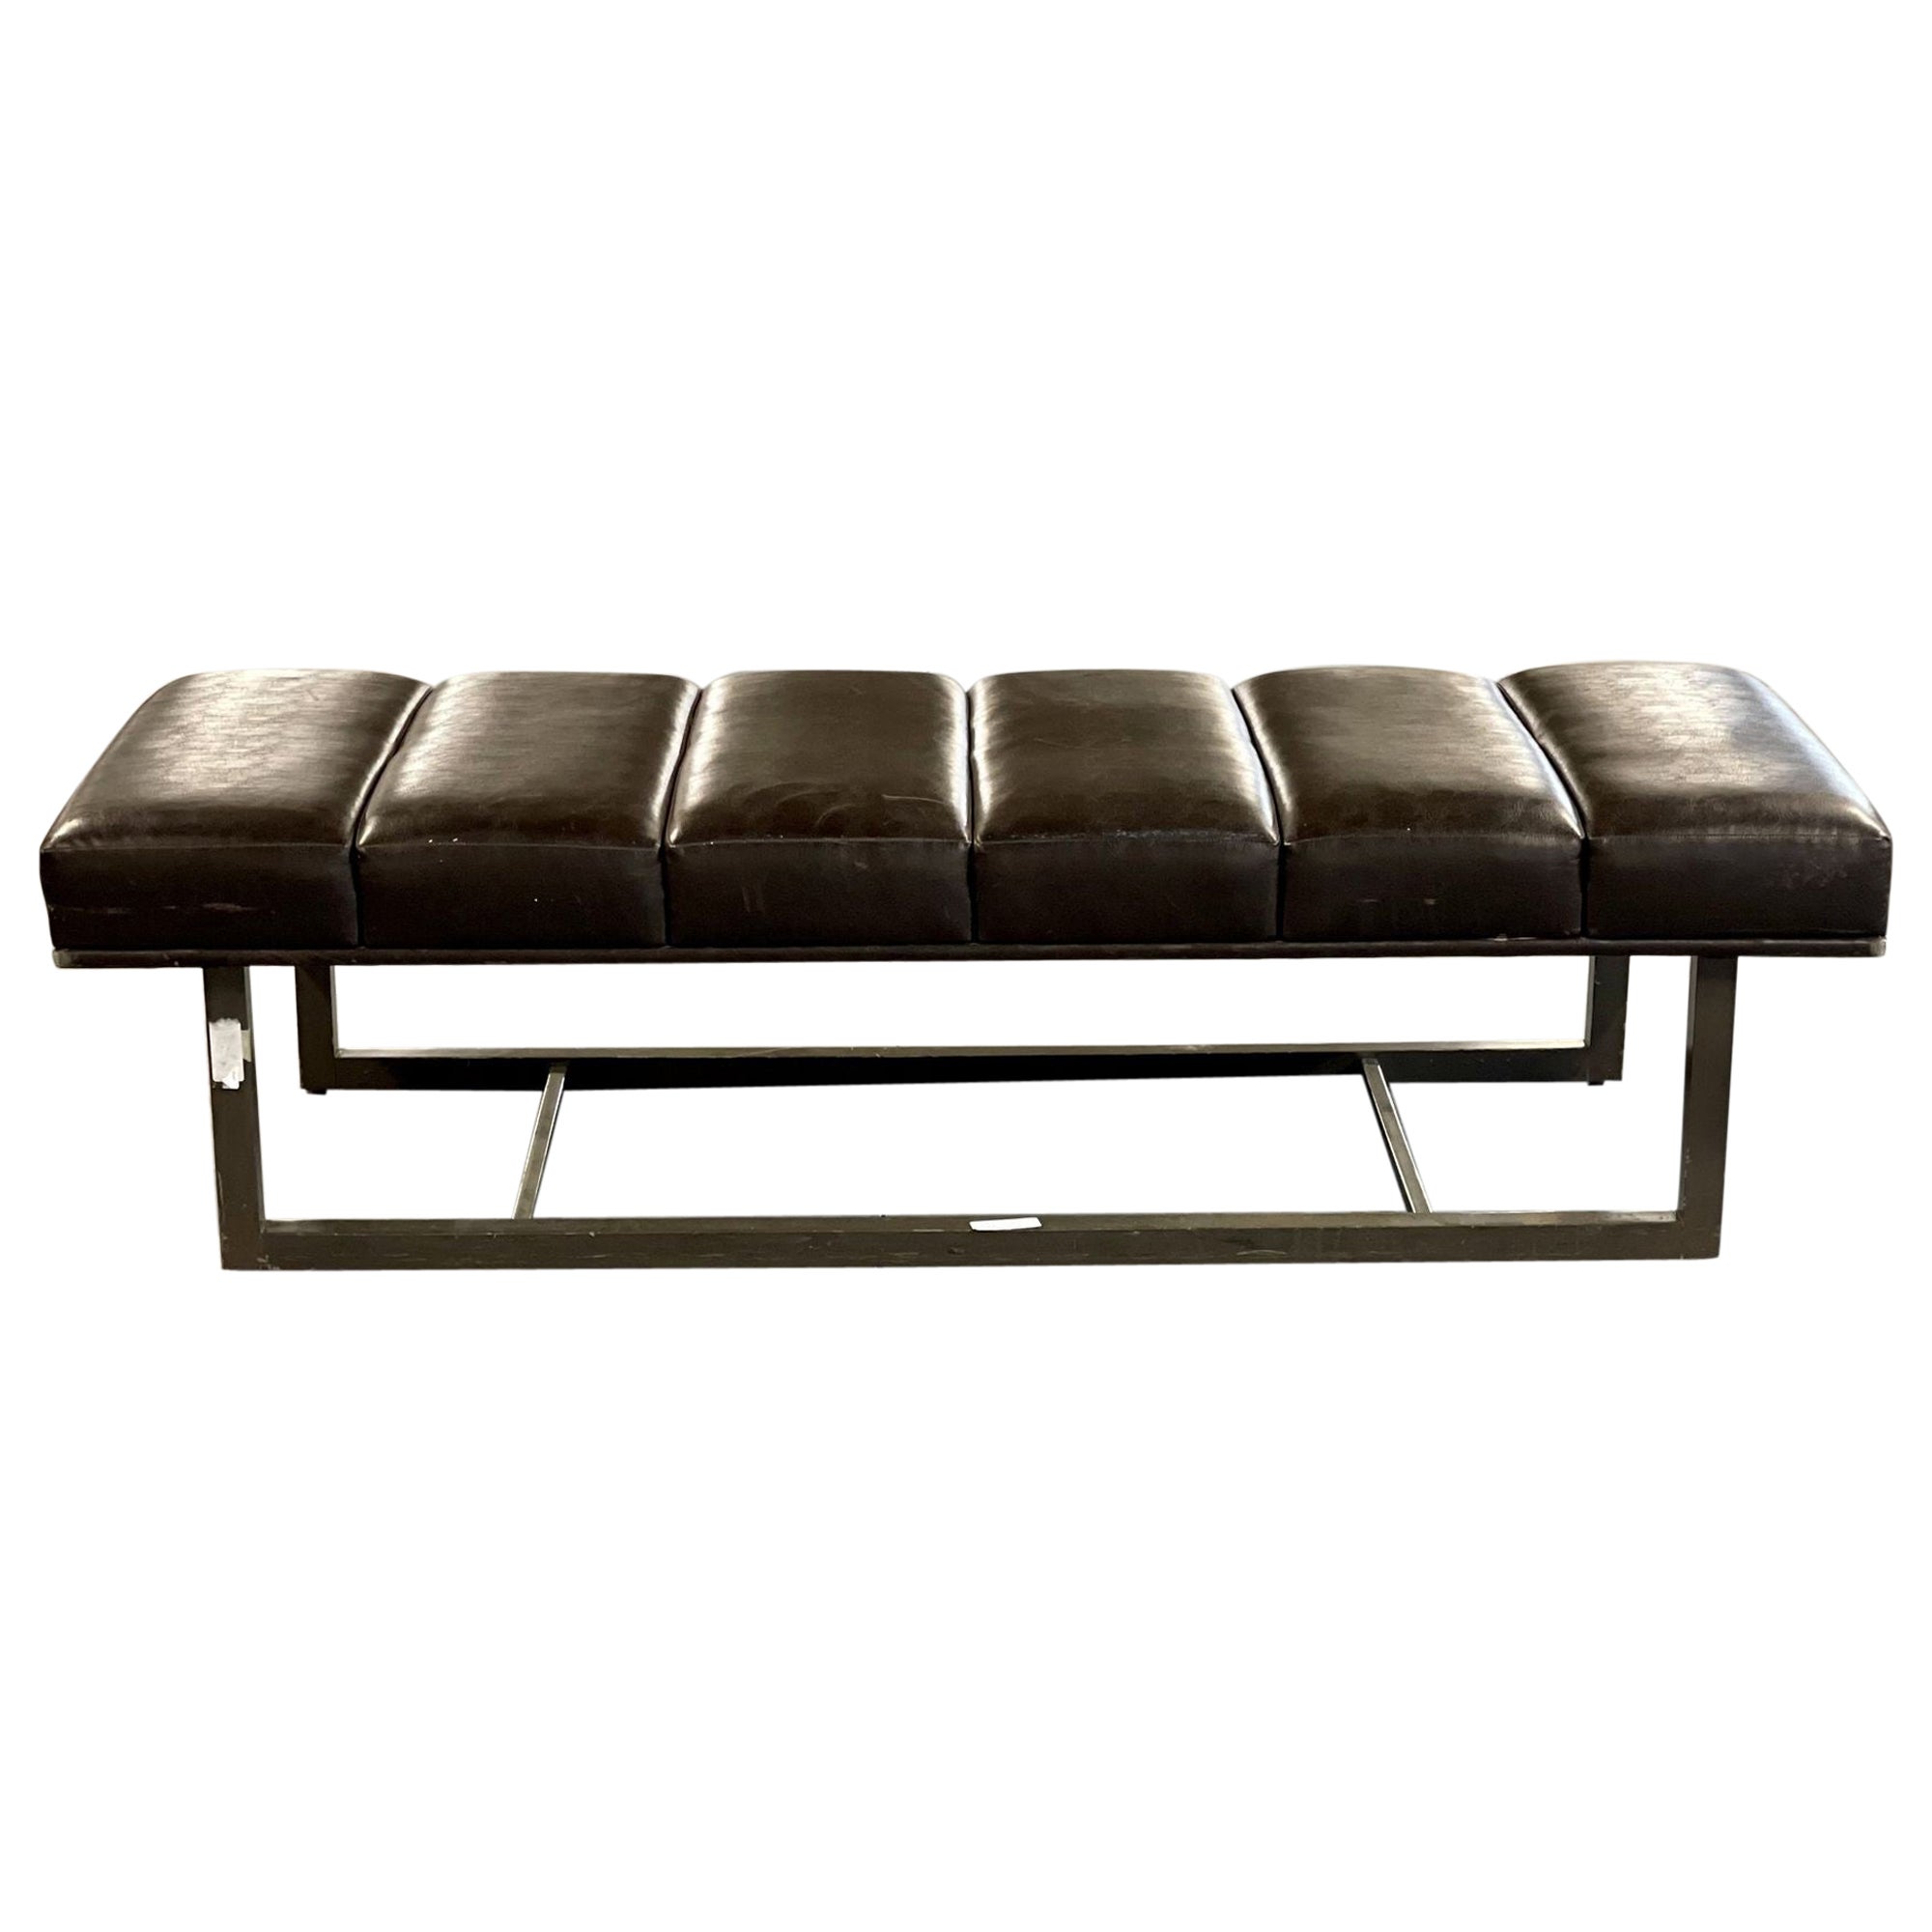 Mid-Century Modern Bench / Ottoman, Leather, Steel For Sale